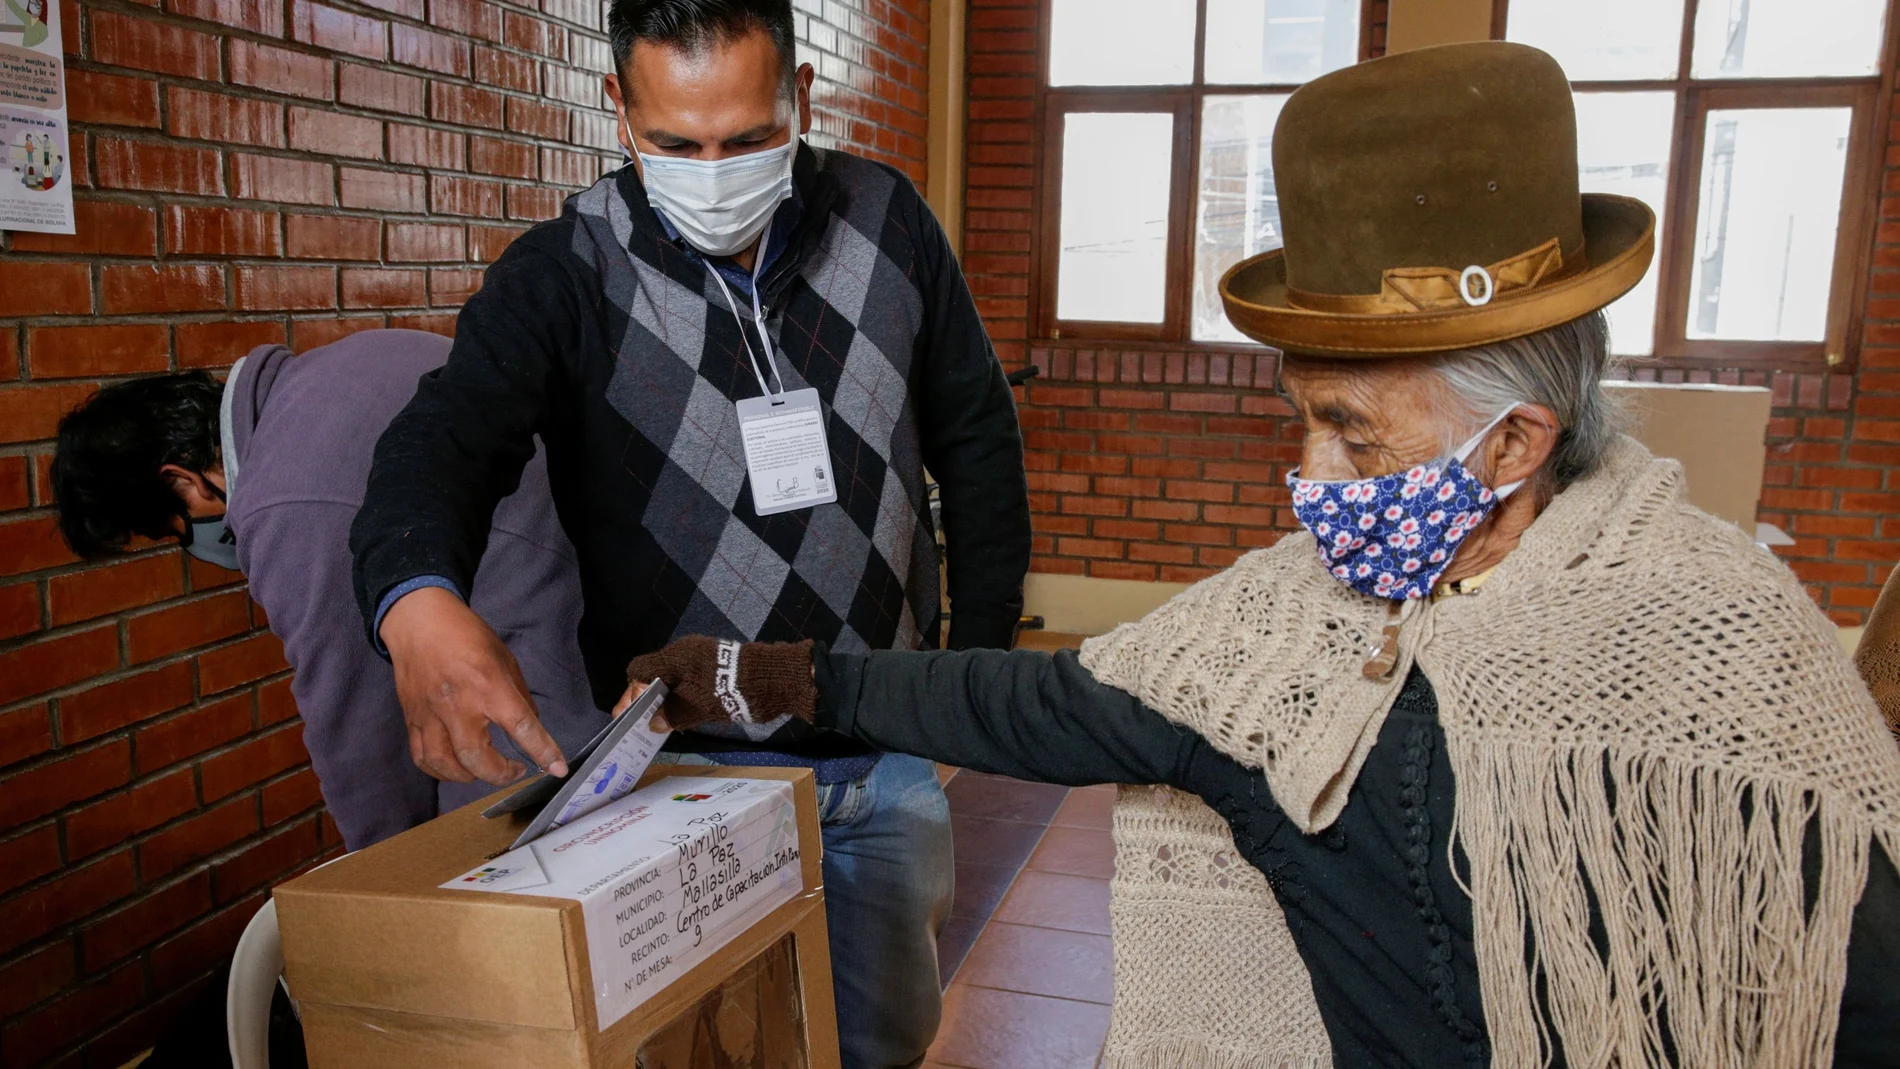 A voter casts her ballot at a polling station during the presidential election in La Paz, Bolivia, October 18, 2020. REUTERS/David Mercado